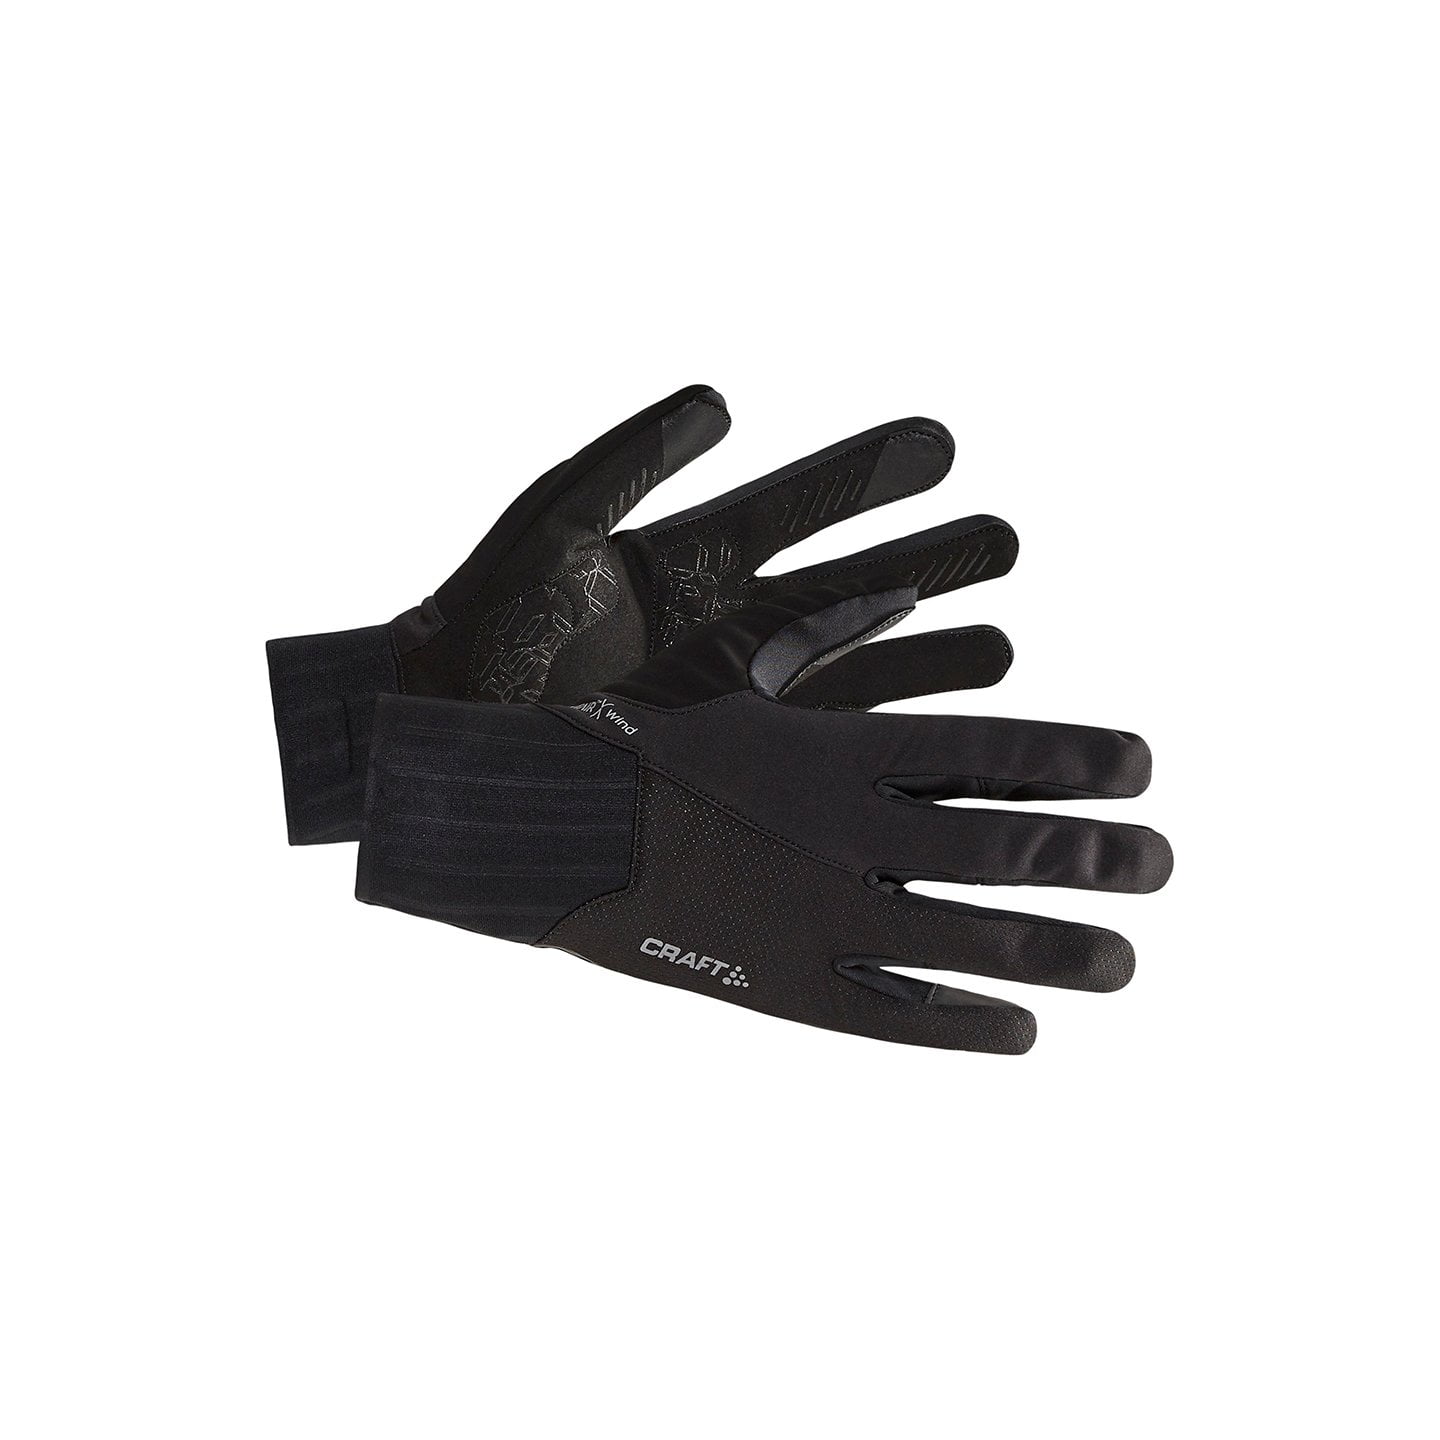 CRAFT Adv SubZ All Weather Winter Gloves Winter Cycling Gloves, for men, size L, Cycling gloves, Bike gear